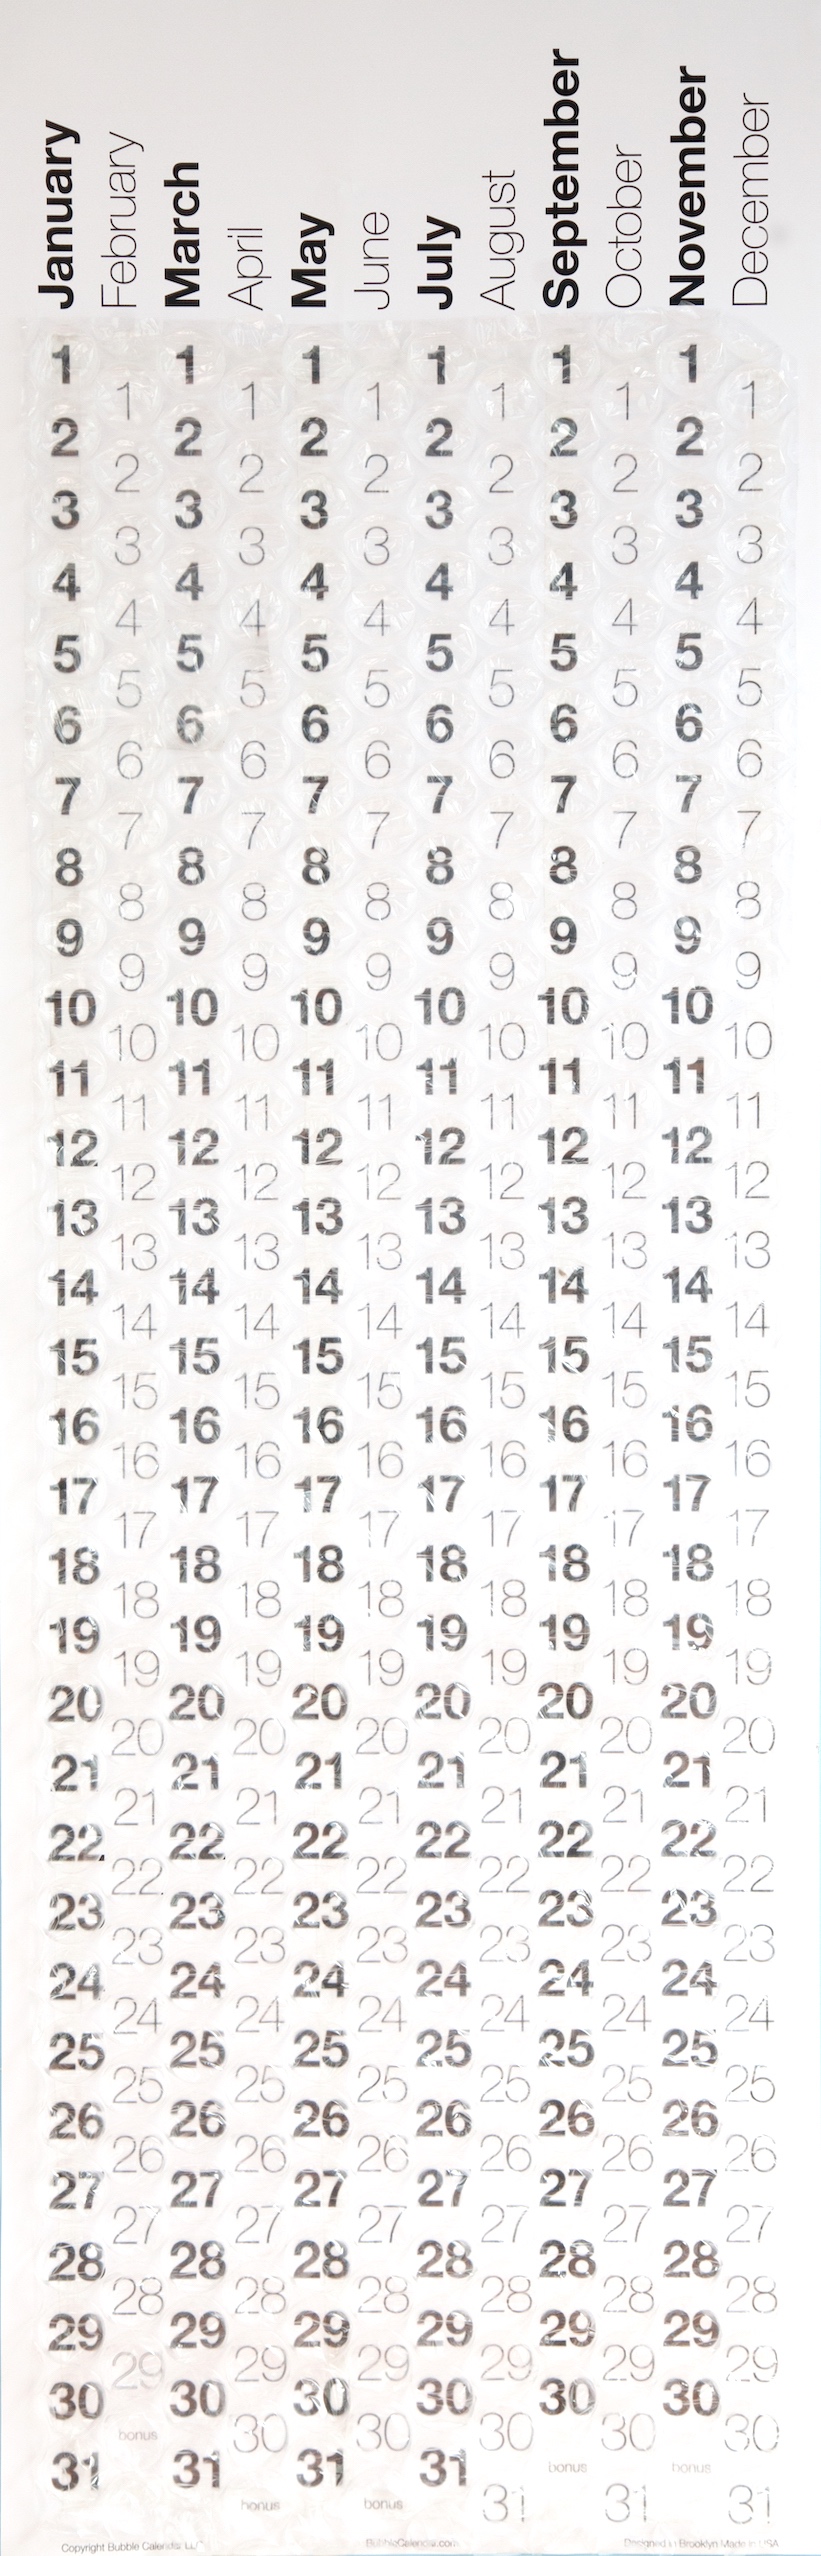 Bubble Wrap Calendar A Poster Sized Calendar With A Bubble To Pop Every Day